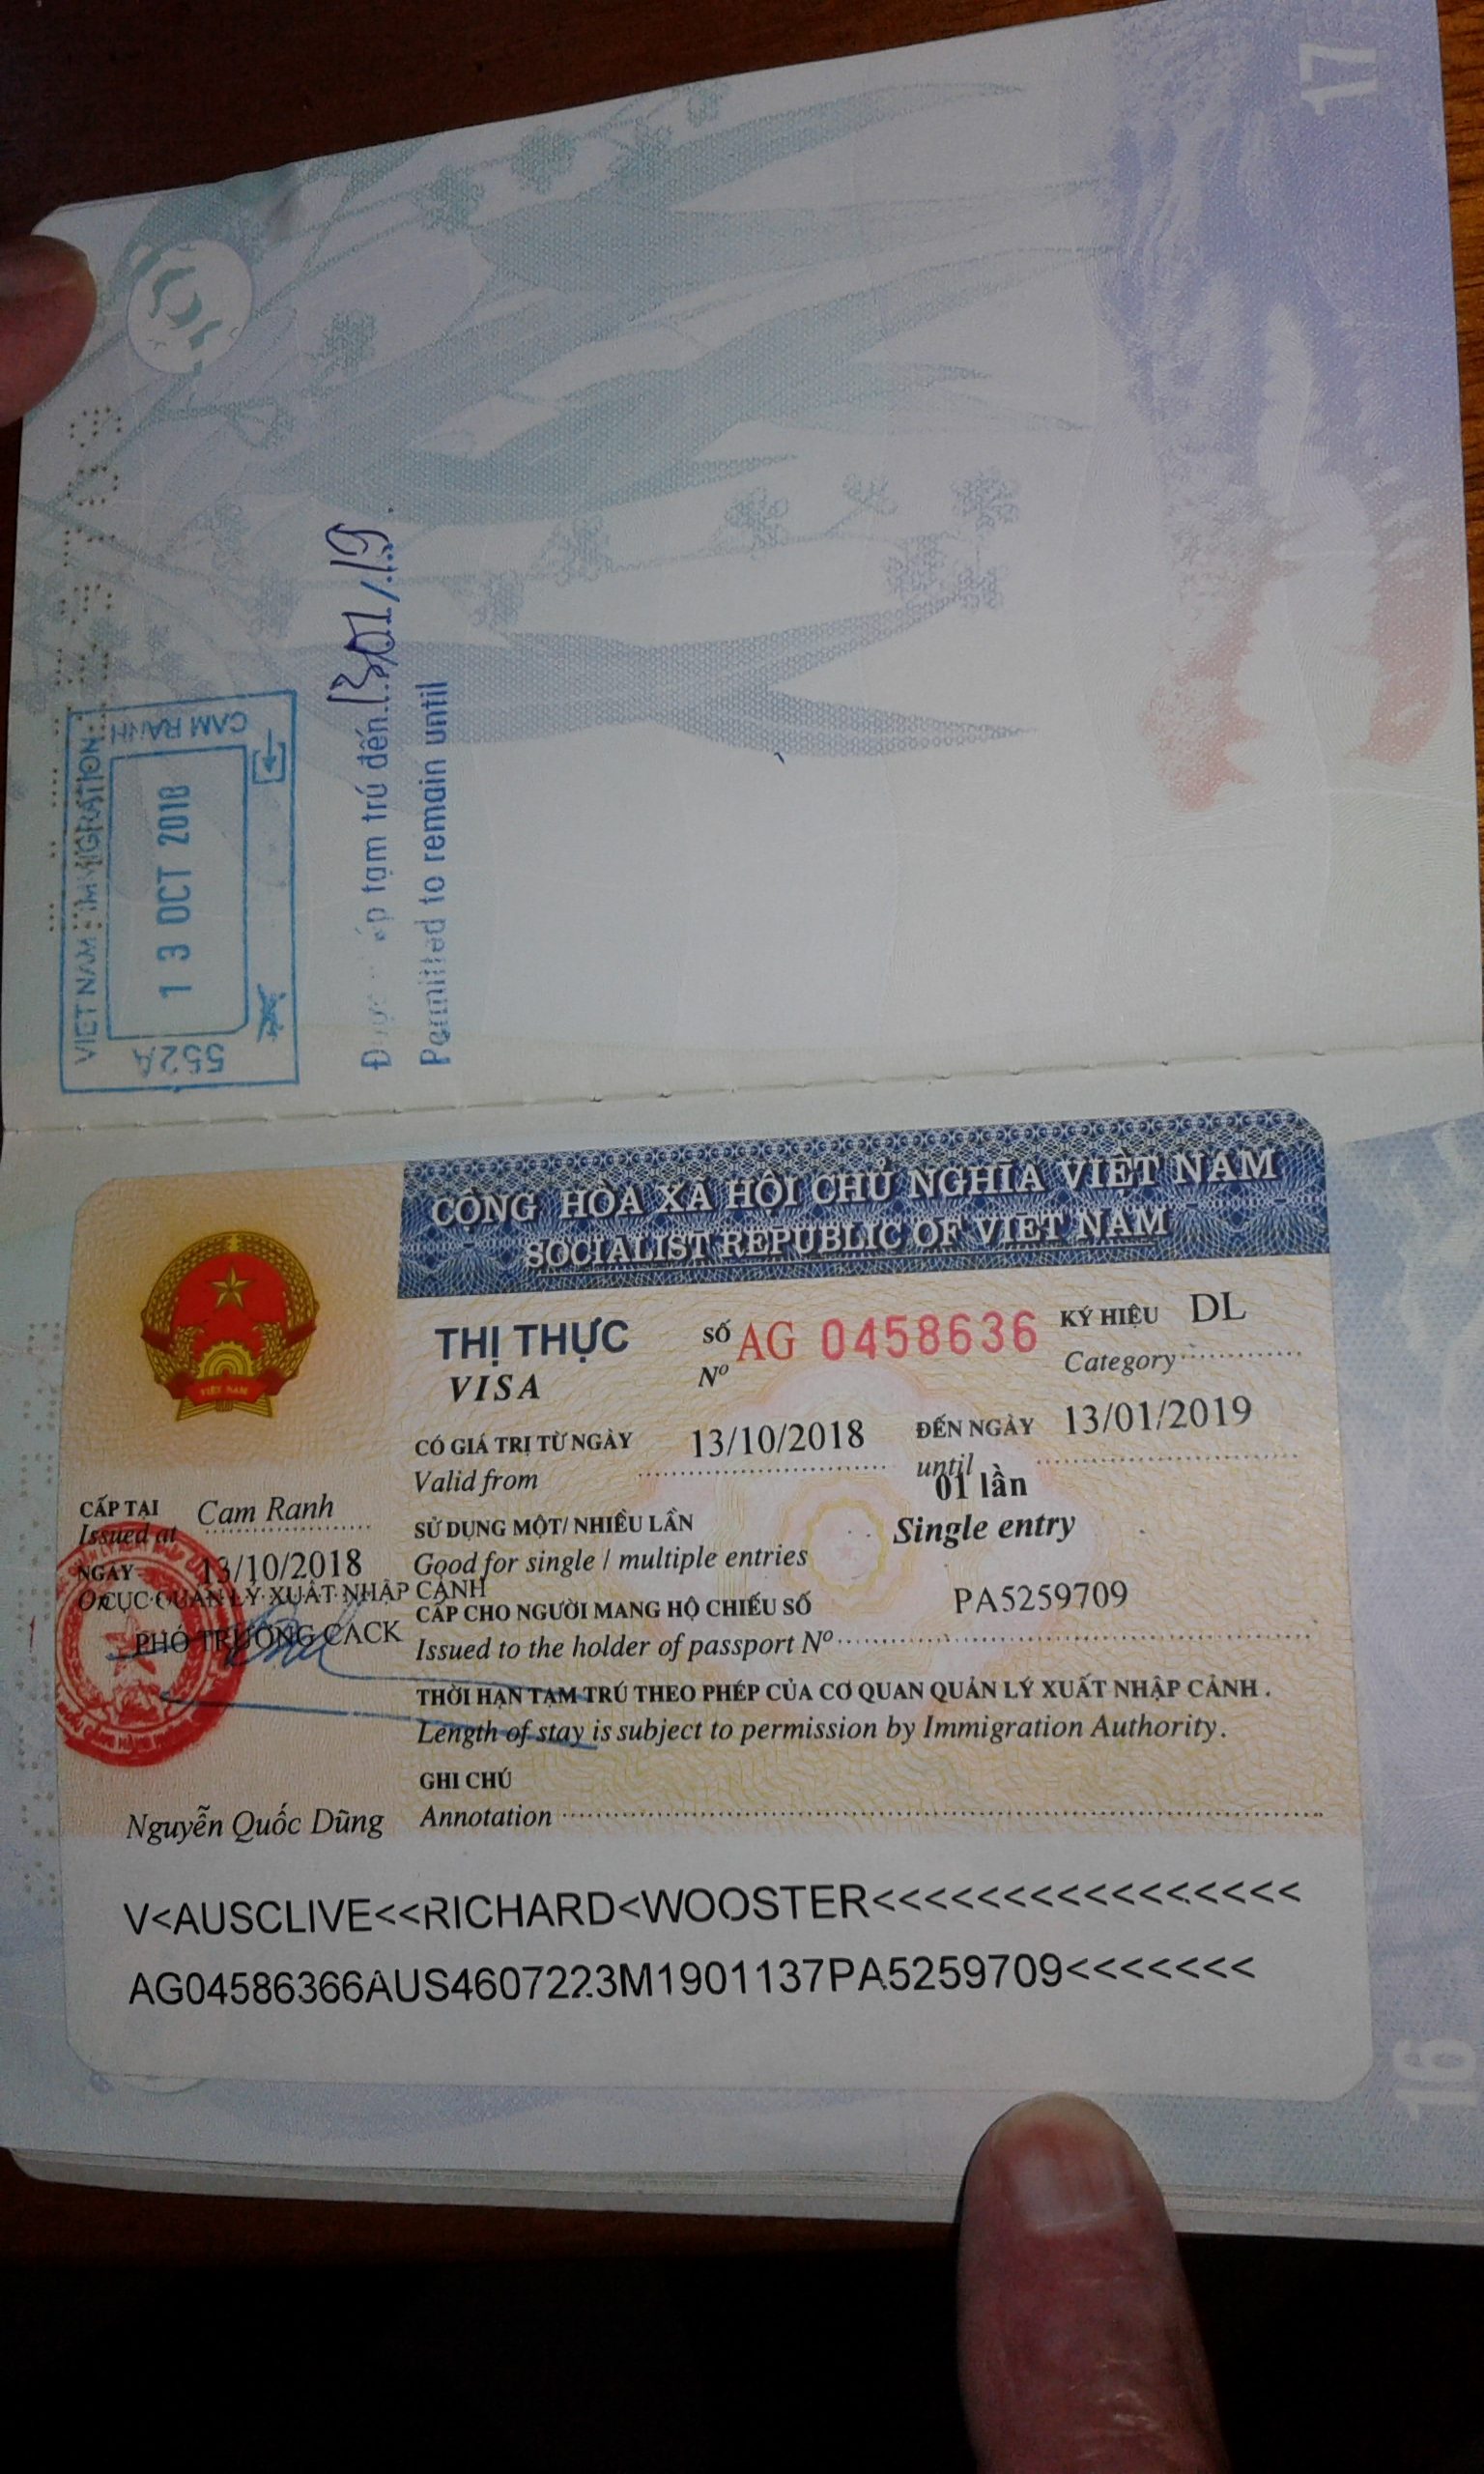 How Can American Citizens Get Vietnam Visa Multiple Entry 3 Months?